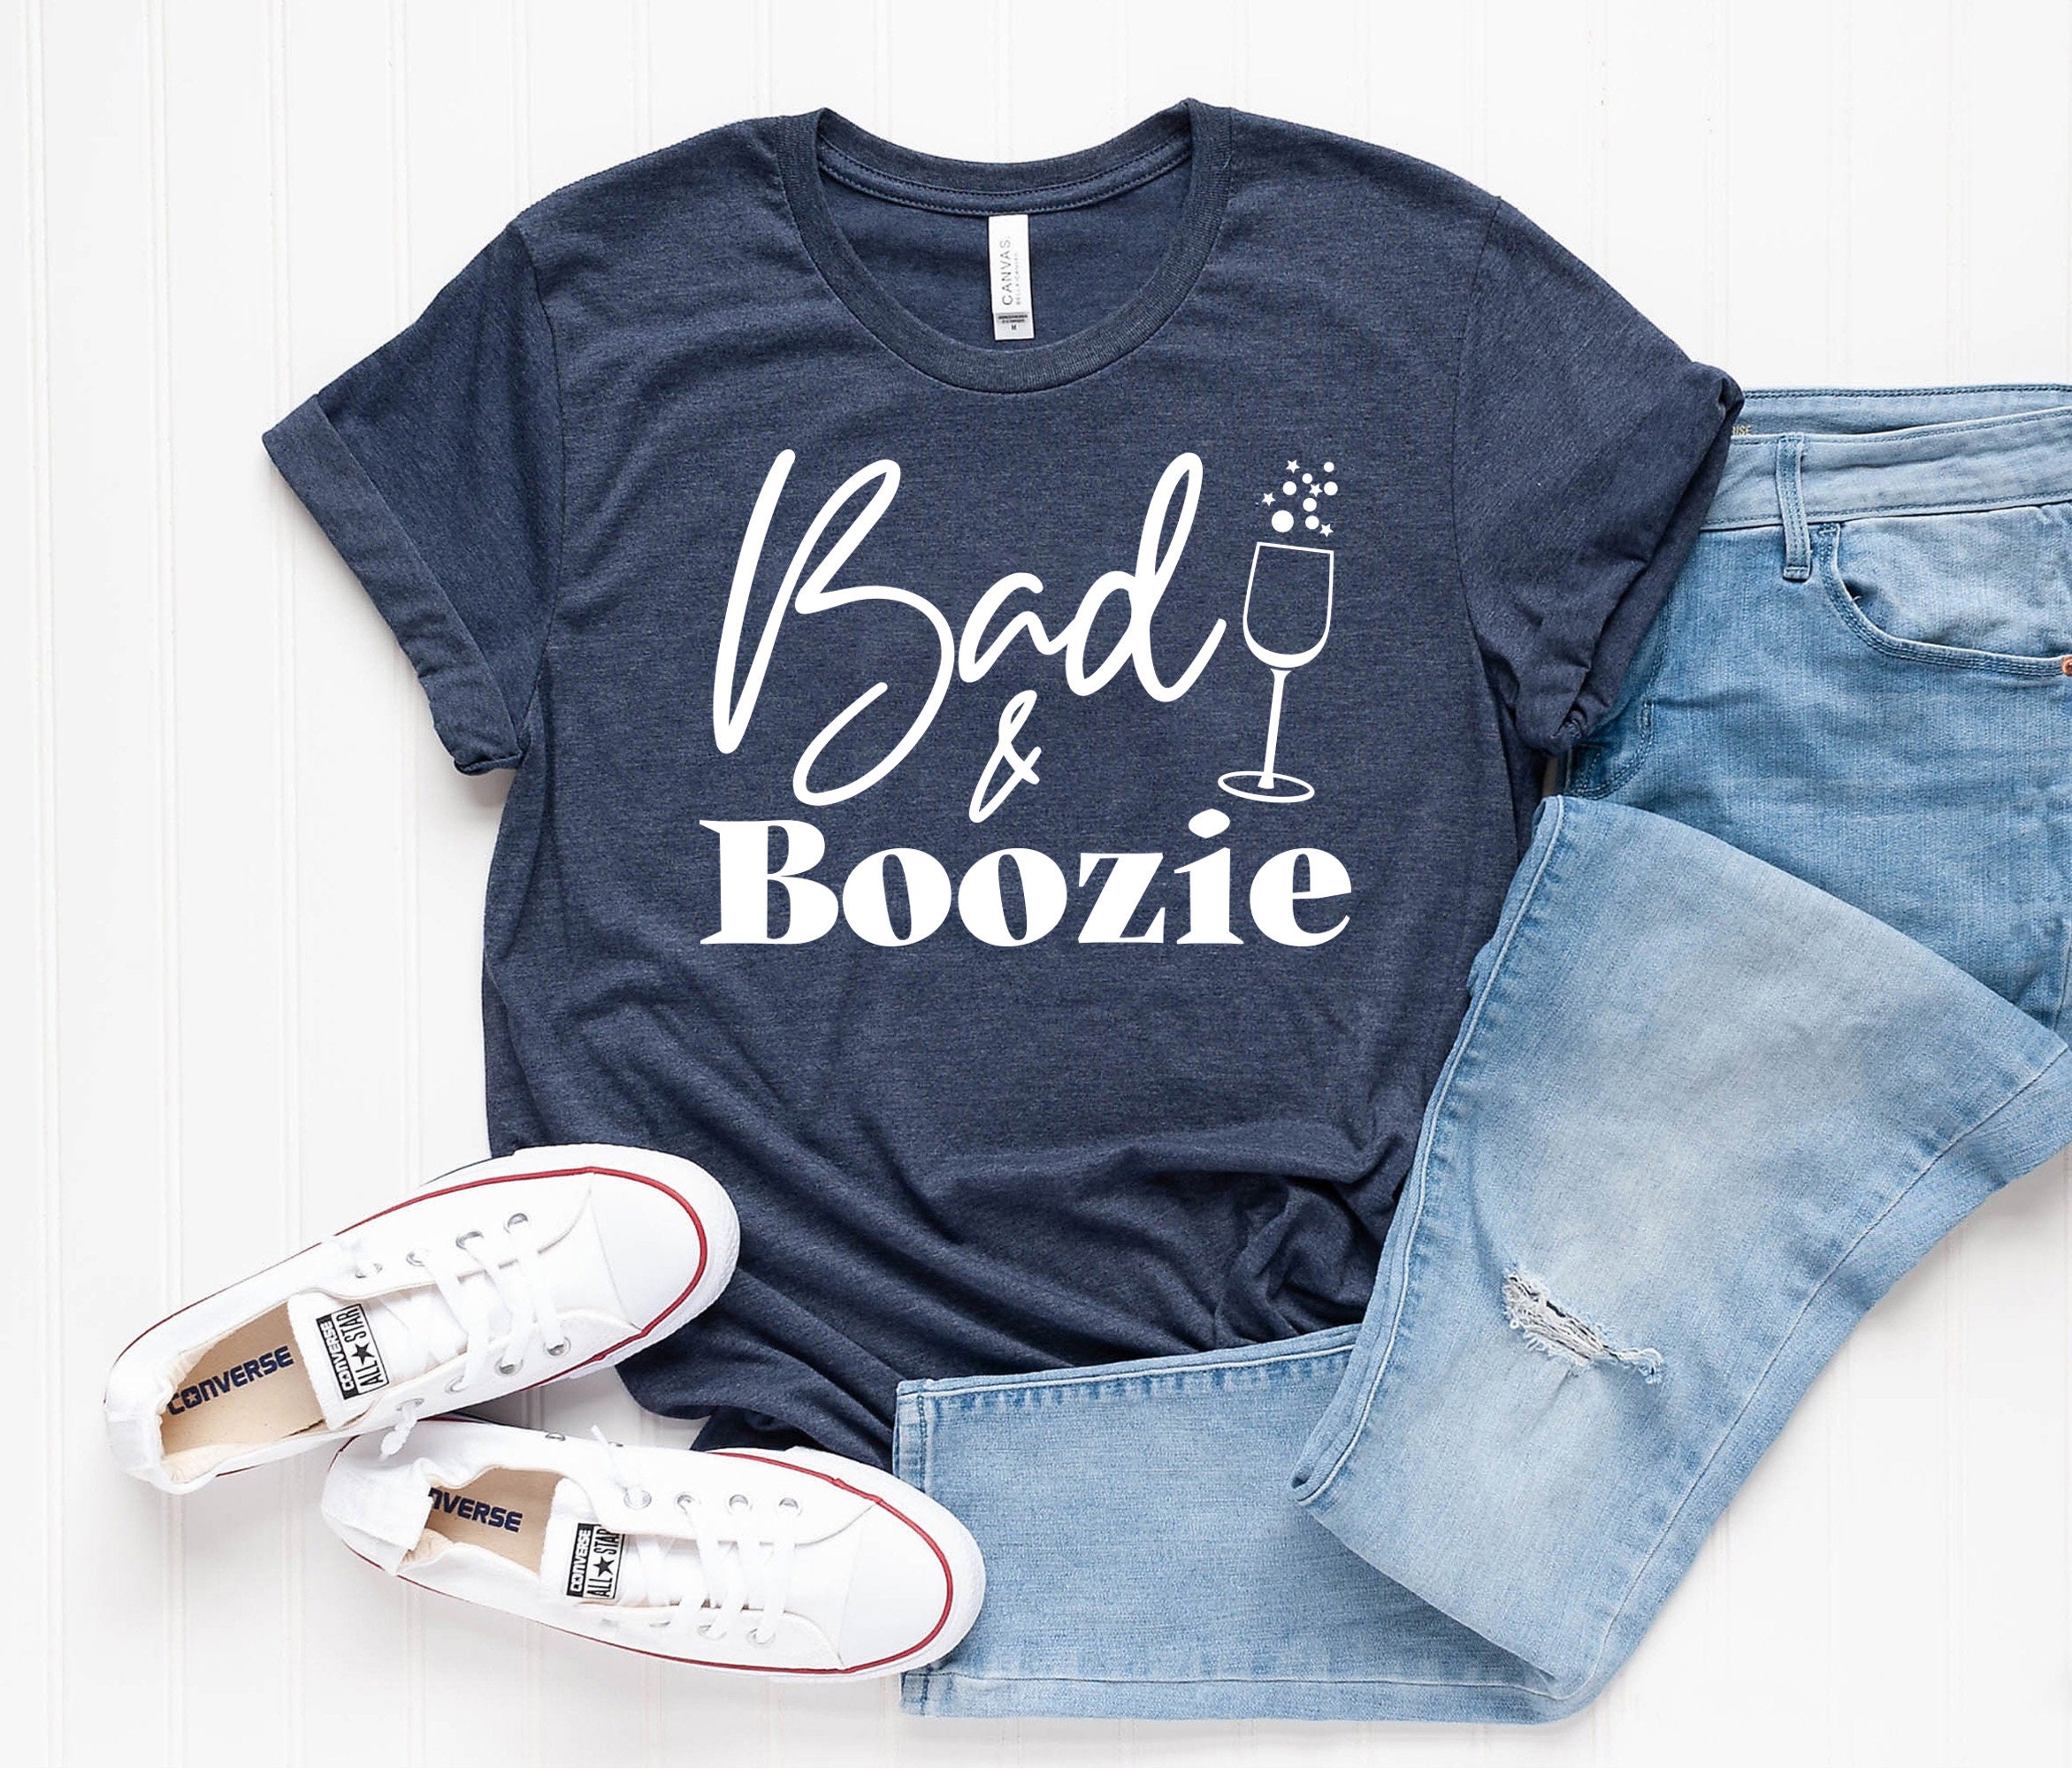 Bachelorette Party Shirts Bad and Boozie Shirts Bride and | Etsy